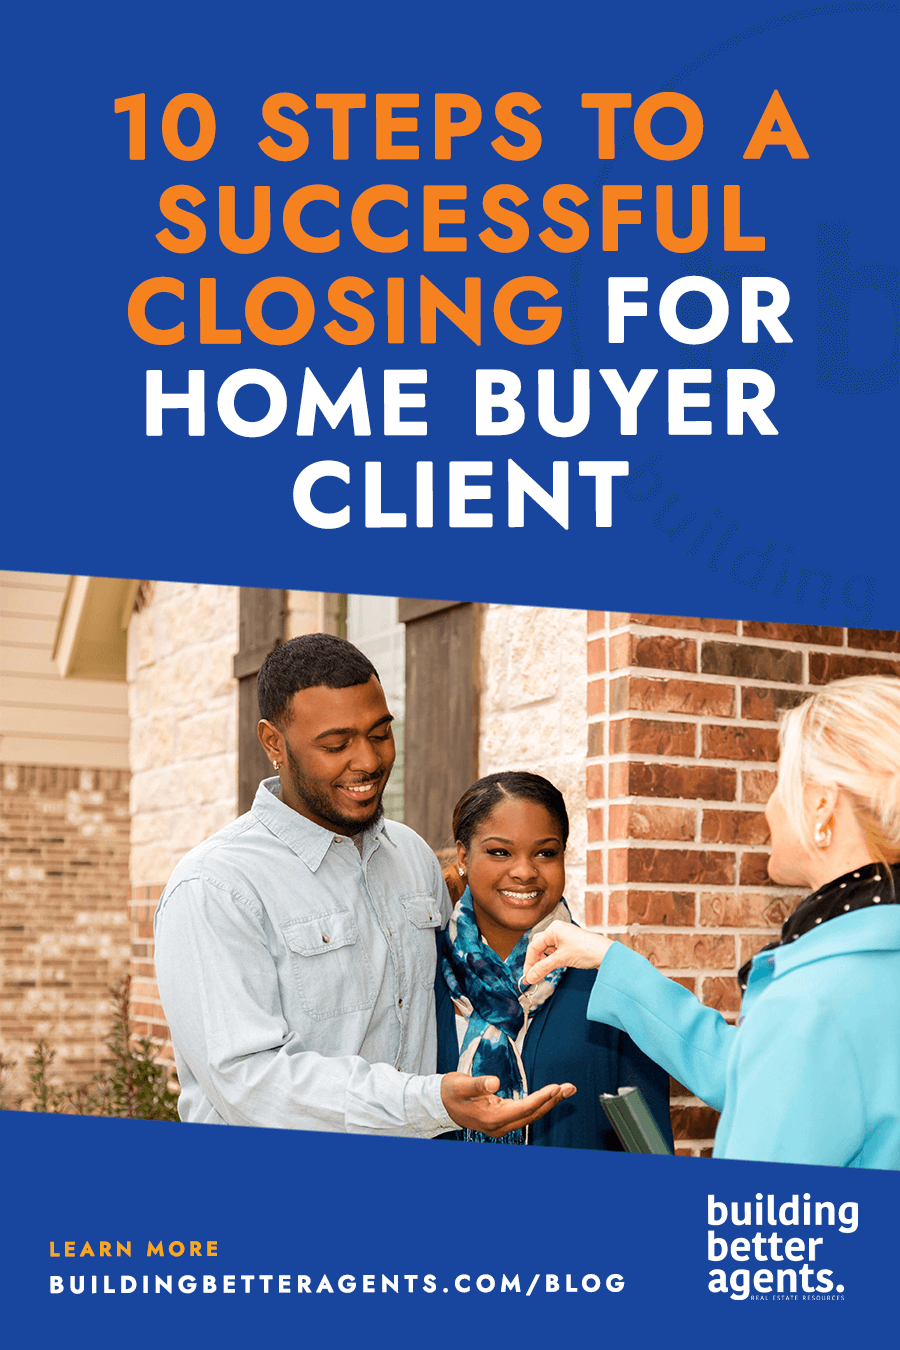 10 Steps to a Successful Closing for Your Home Buyer Client